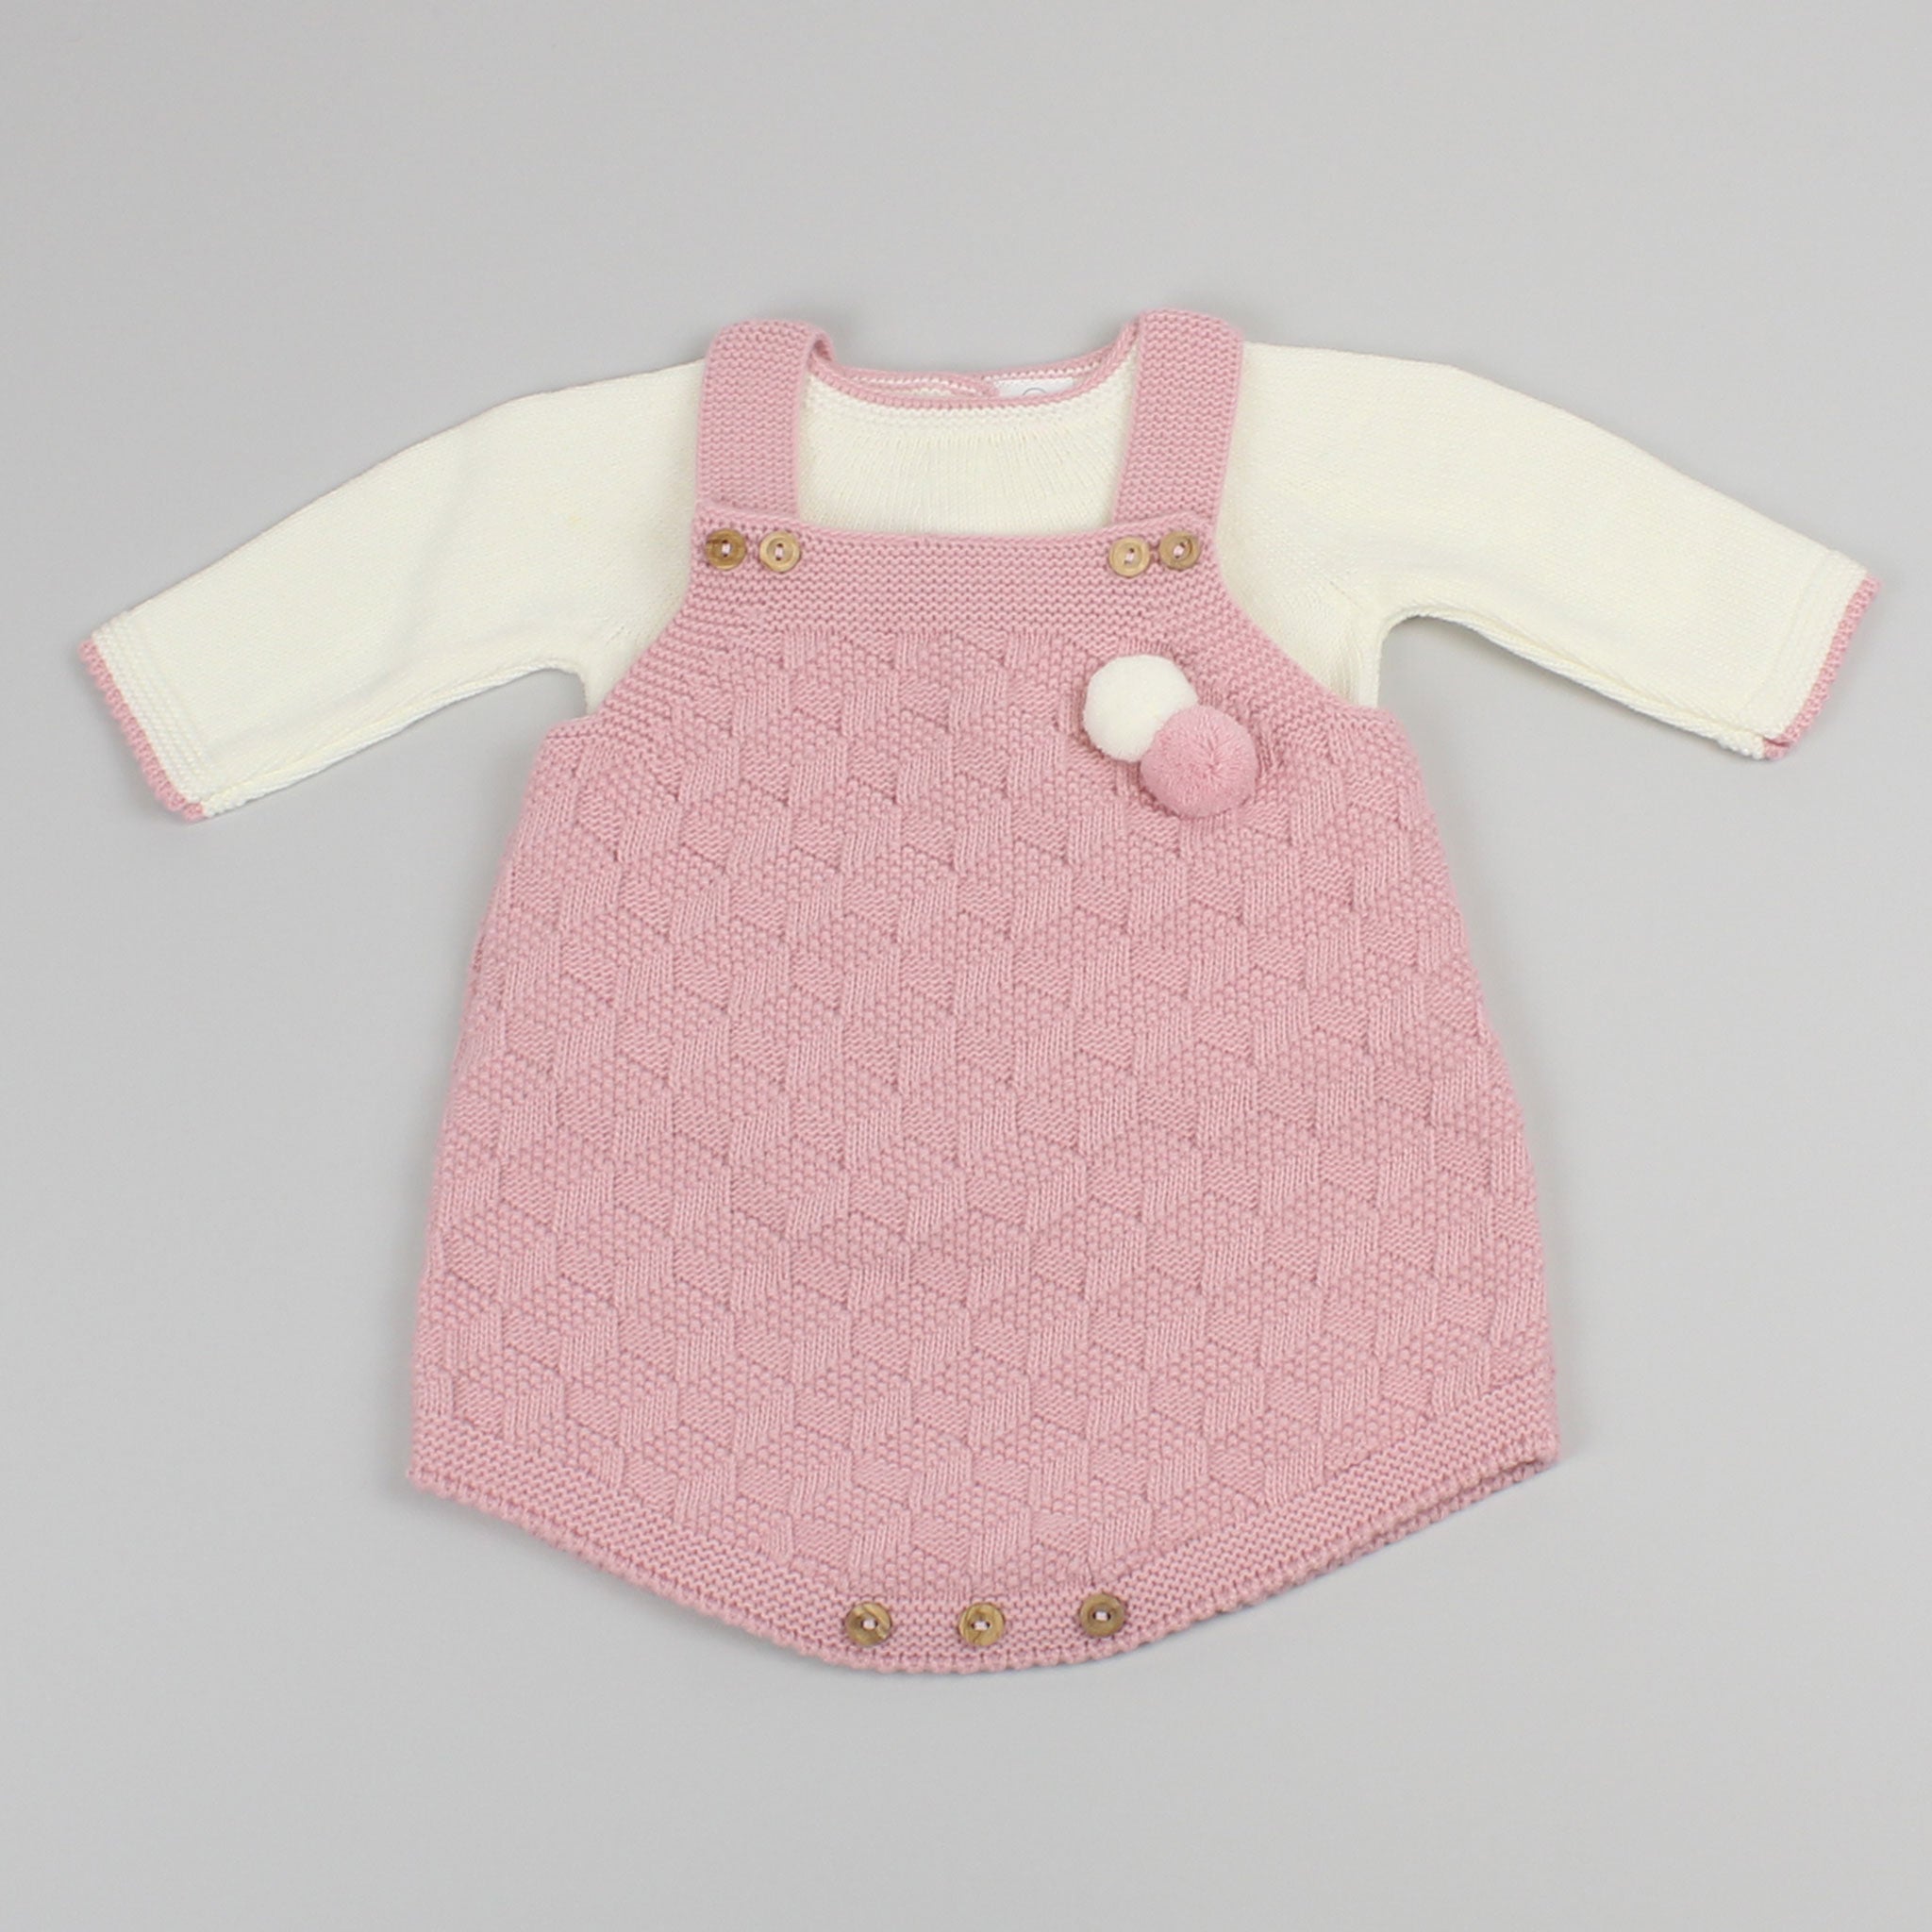 Baby Pink Knitted Outfit - Romper, Braces and Jumper